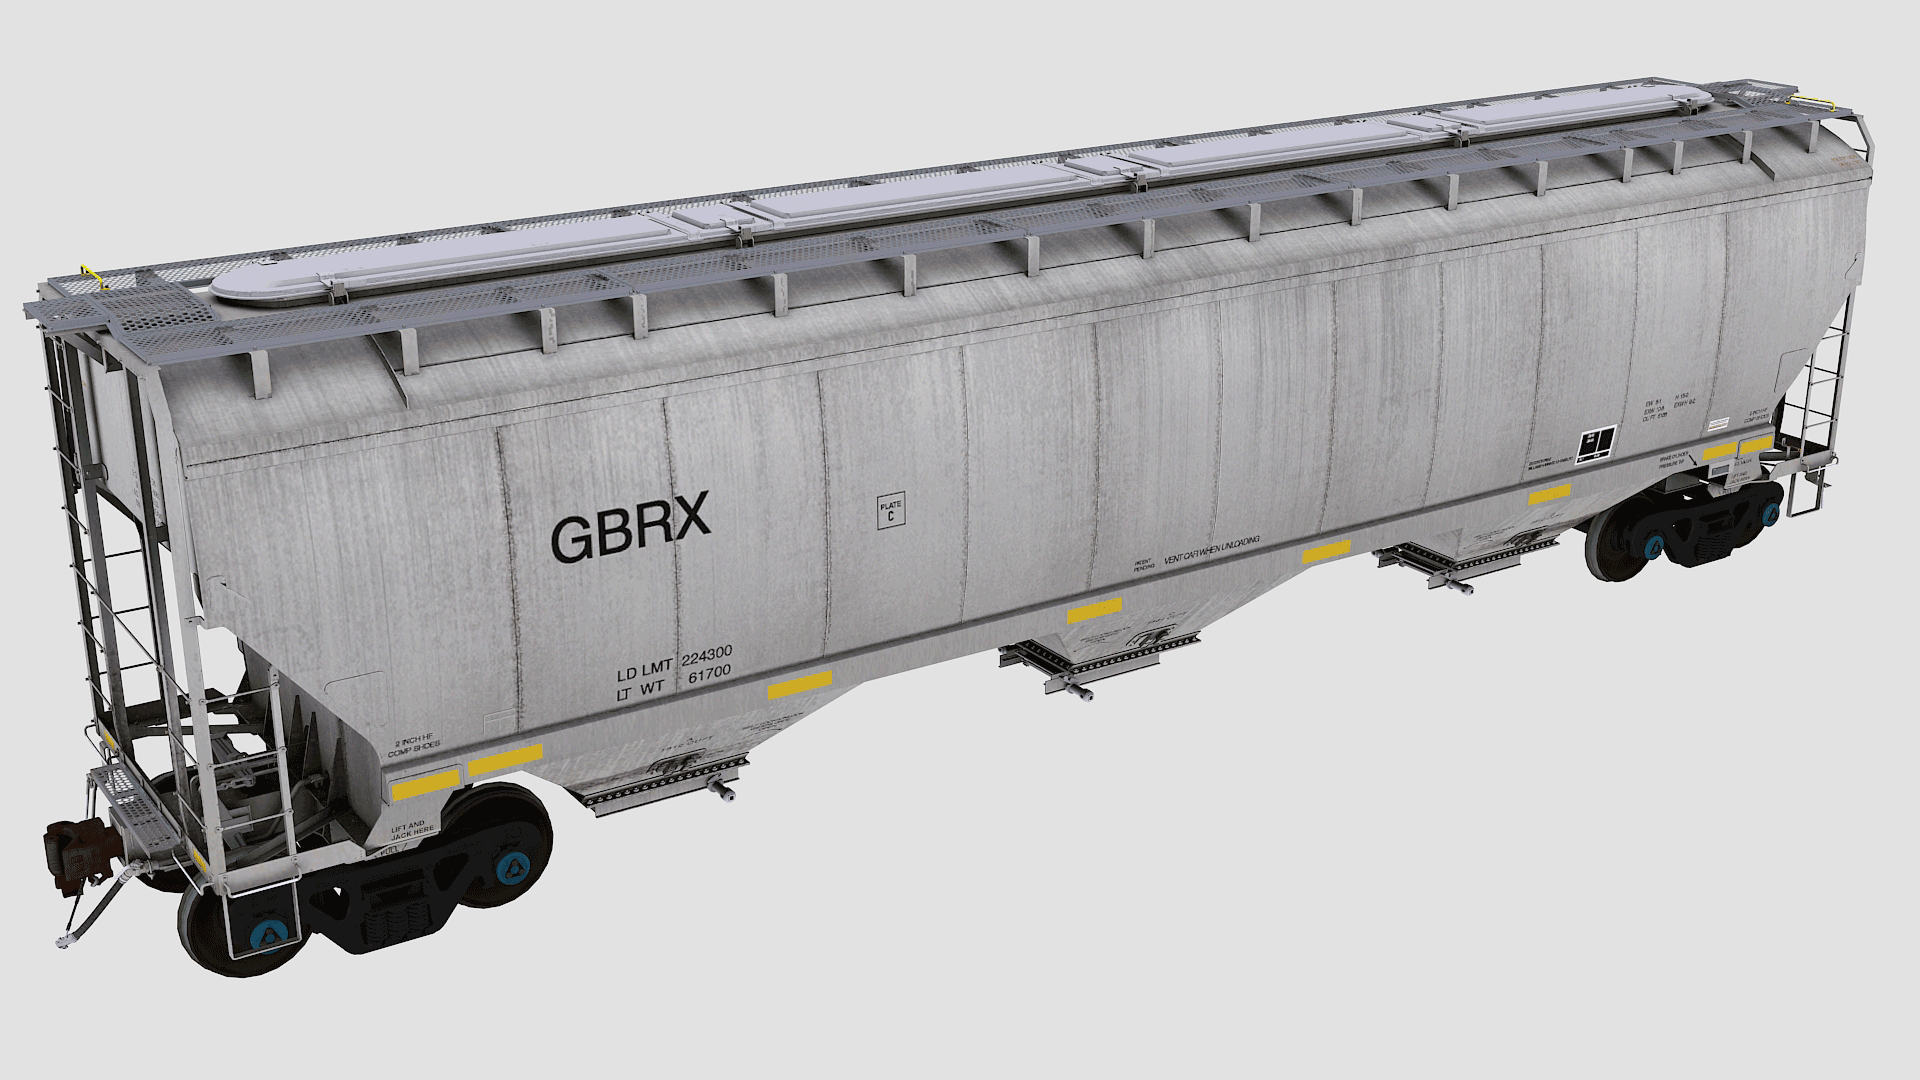 Gbrx Greenbrier three bay covered hopper